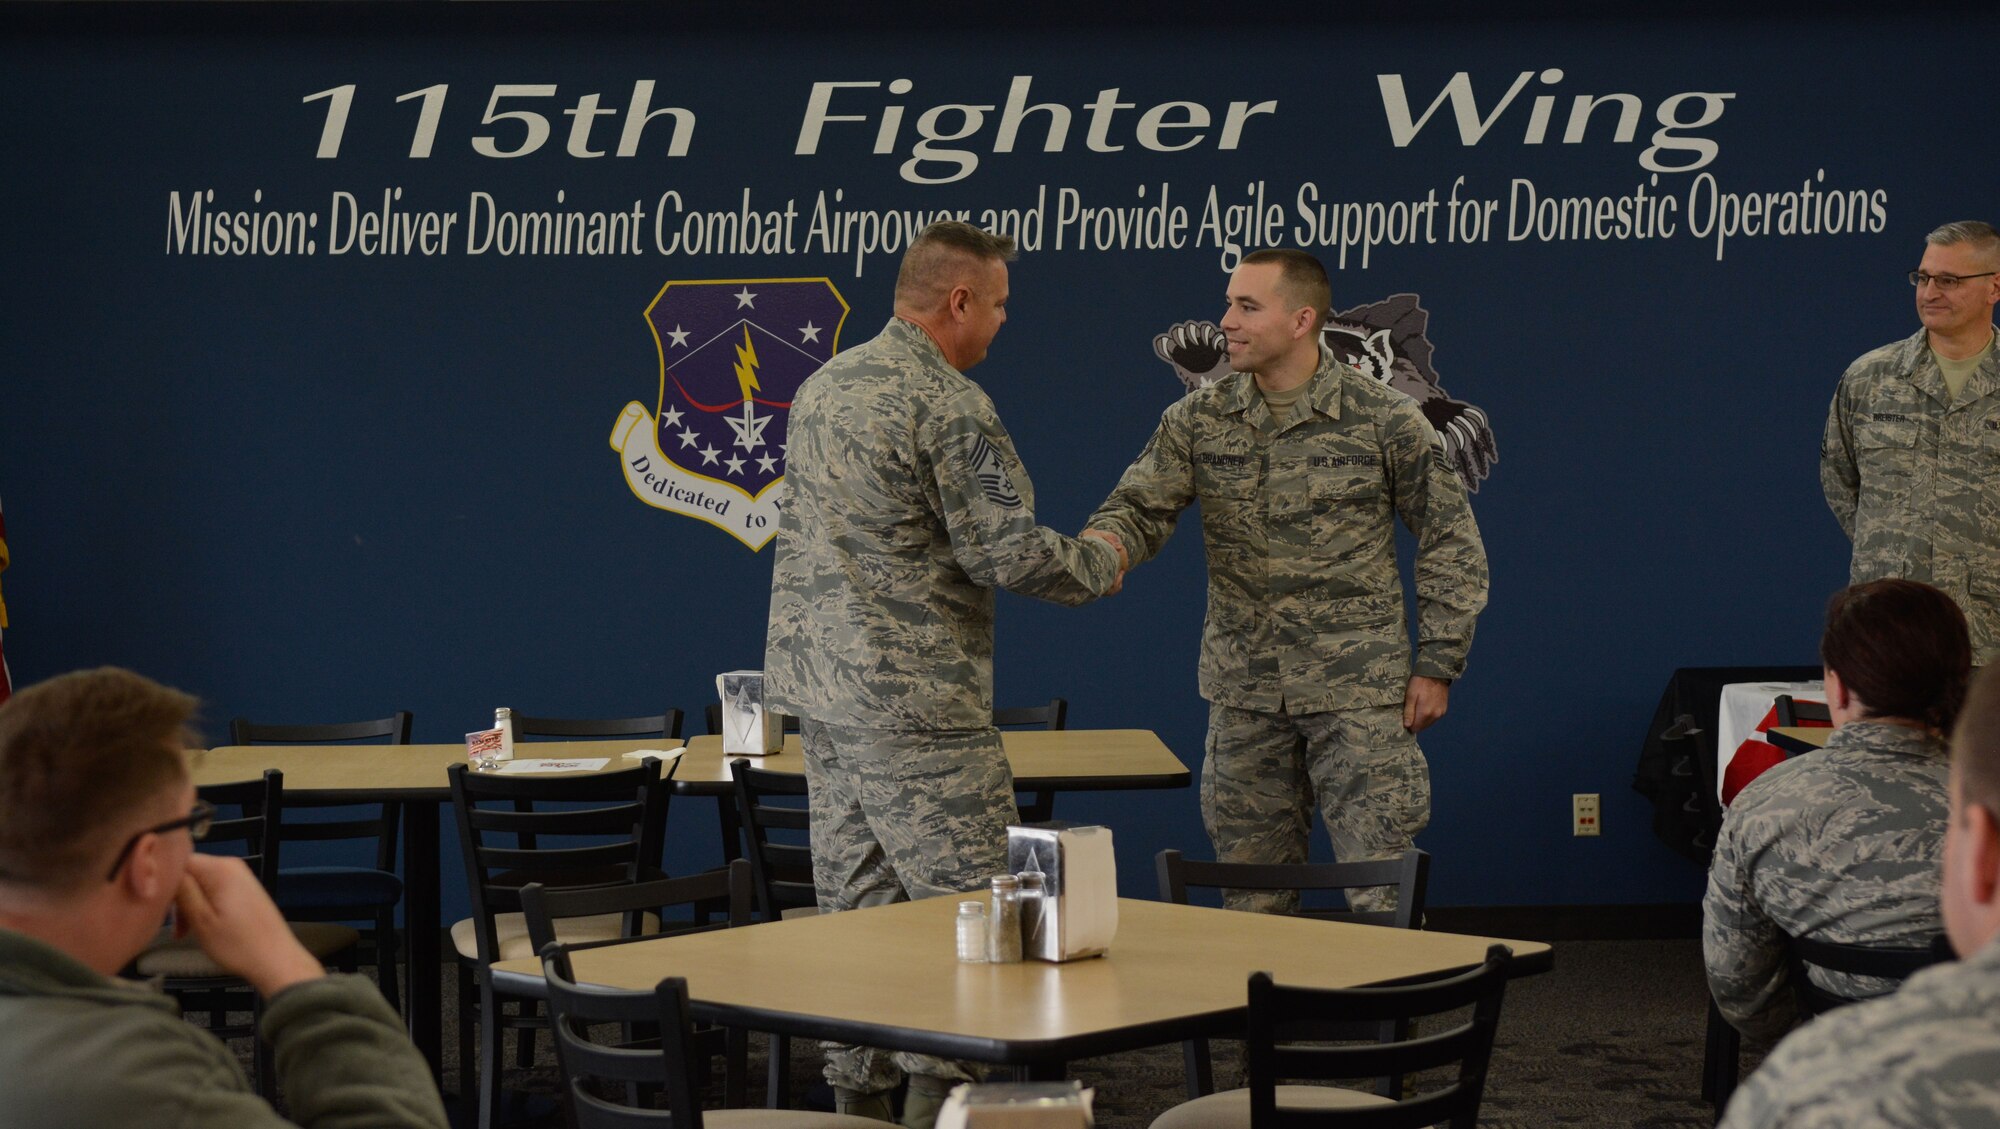 Chief Master Sgt. Richard D. King, 1st Air Force command chief, met with Airmen with the 115th Fighter Wing at the 115th FW in Madison, Wis., Dec. 3, 2017. King came to the wing to speak with Airmen and to discover what they need to accomplish their jobs more effectively. He also spent time thanking Airmen for their achievements, including temporary deployments helping those suffering from recent hurricane damage. (Air National Guard photo by Tech. Sgt. Andrea F. Rhode)